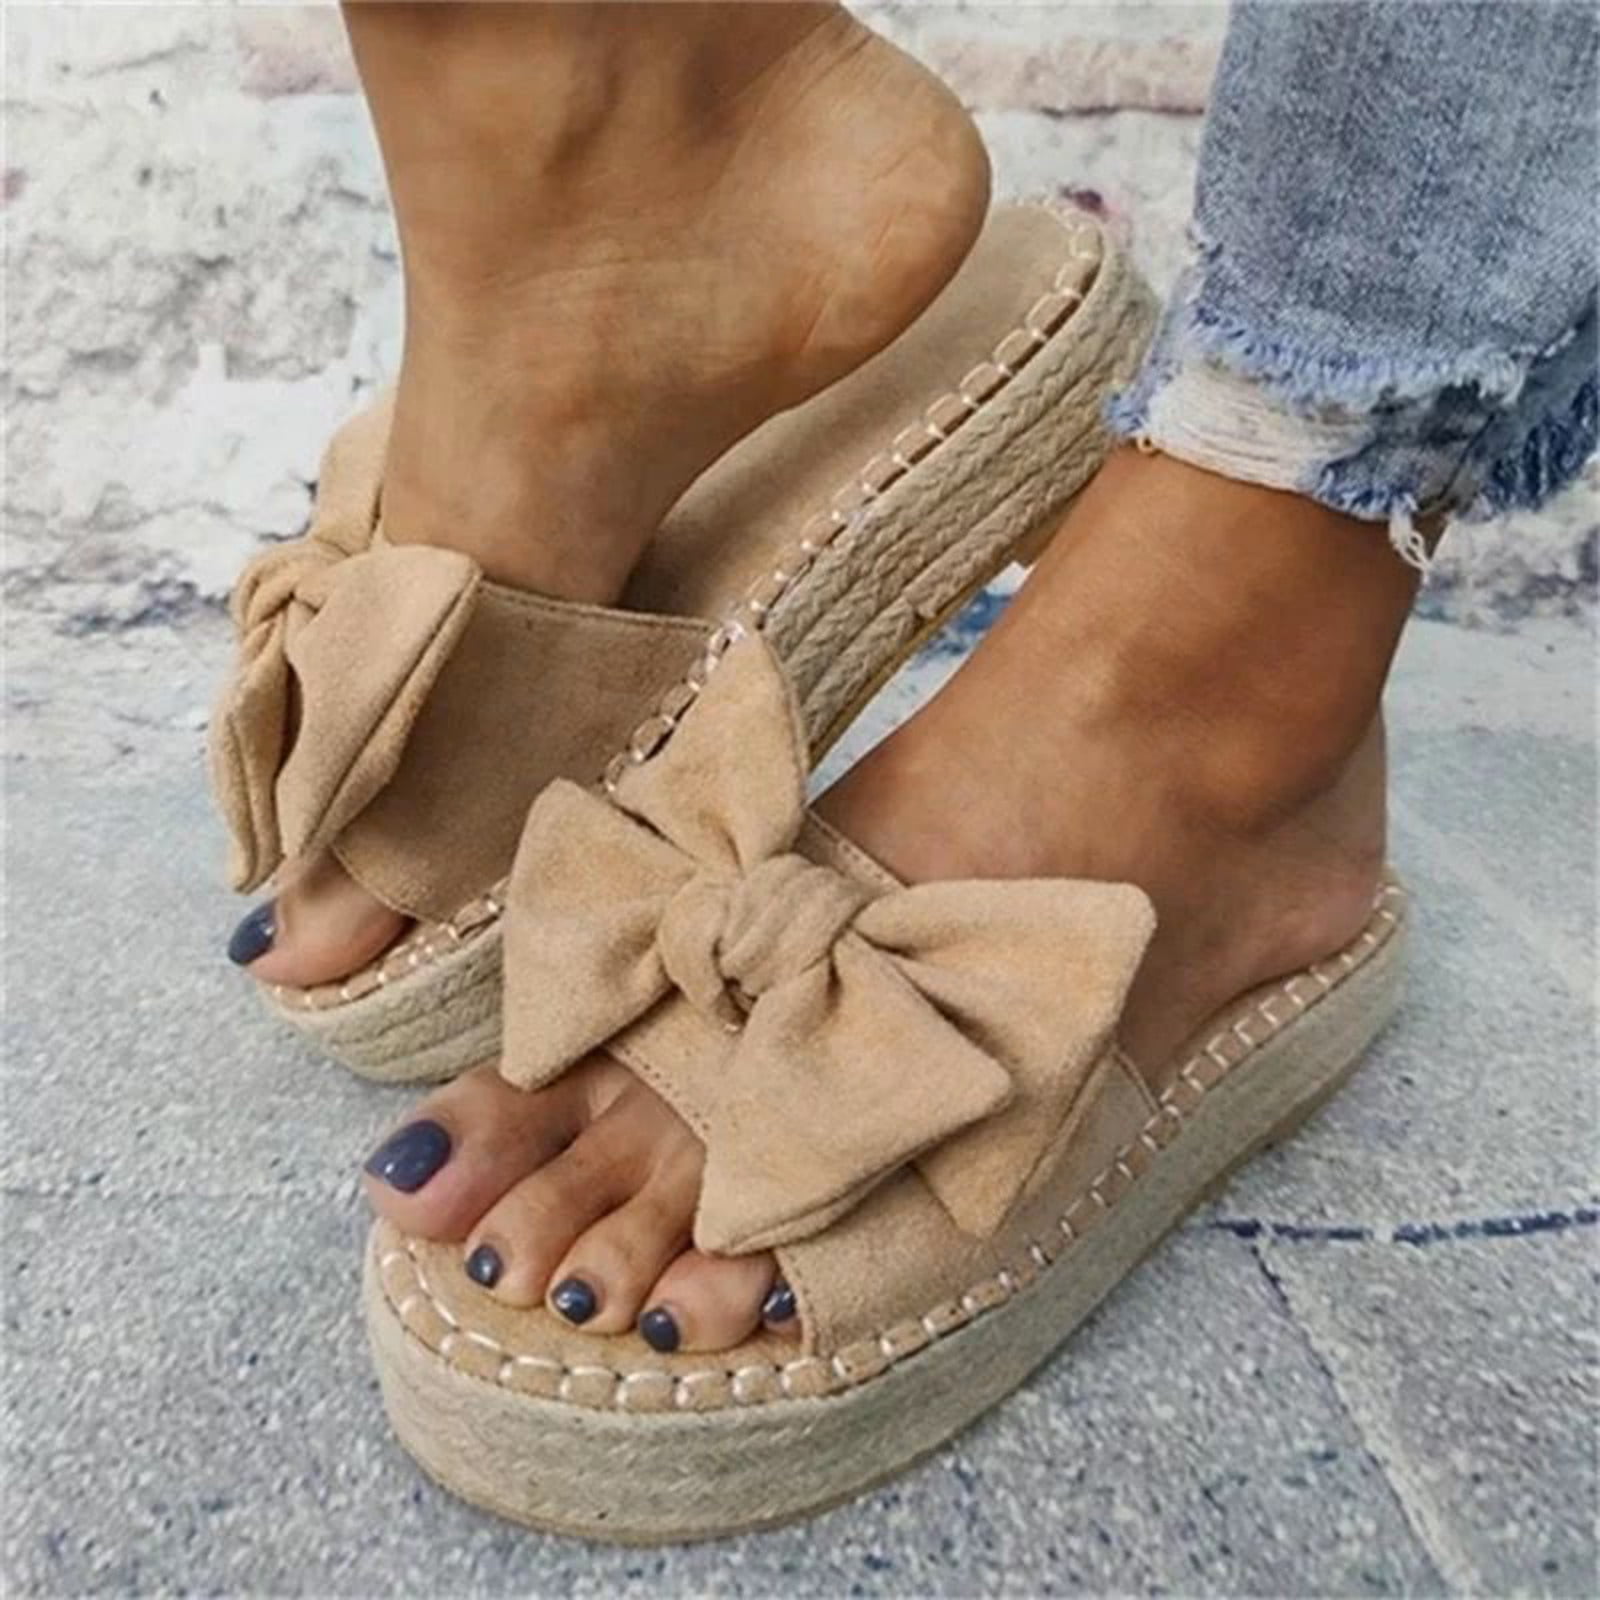 Hemp rope women's shoes shoes large size wedge heel platform sandals Simple  European and American woven